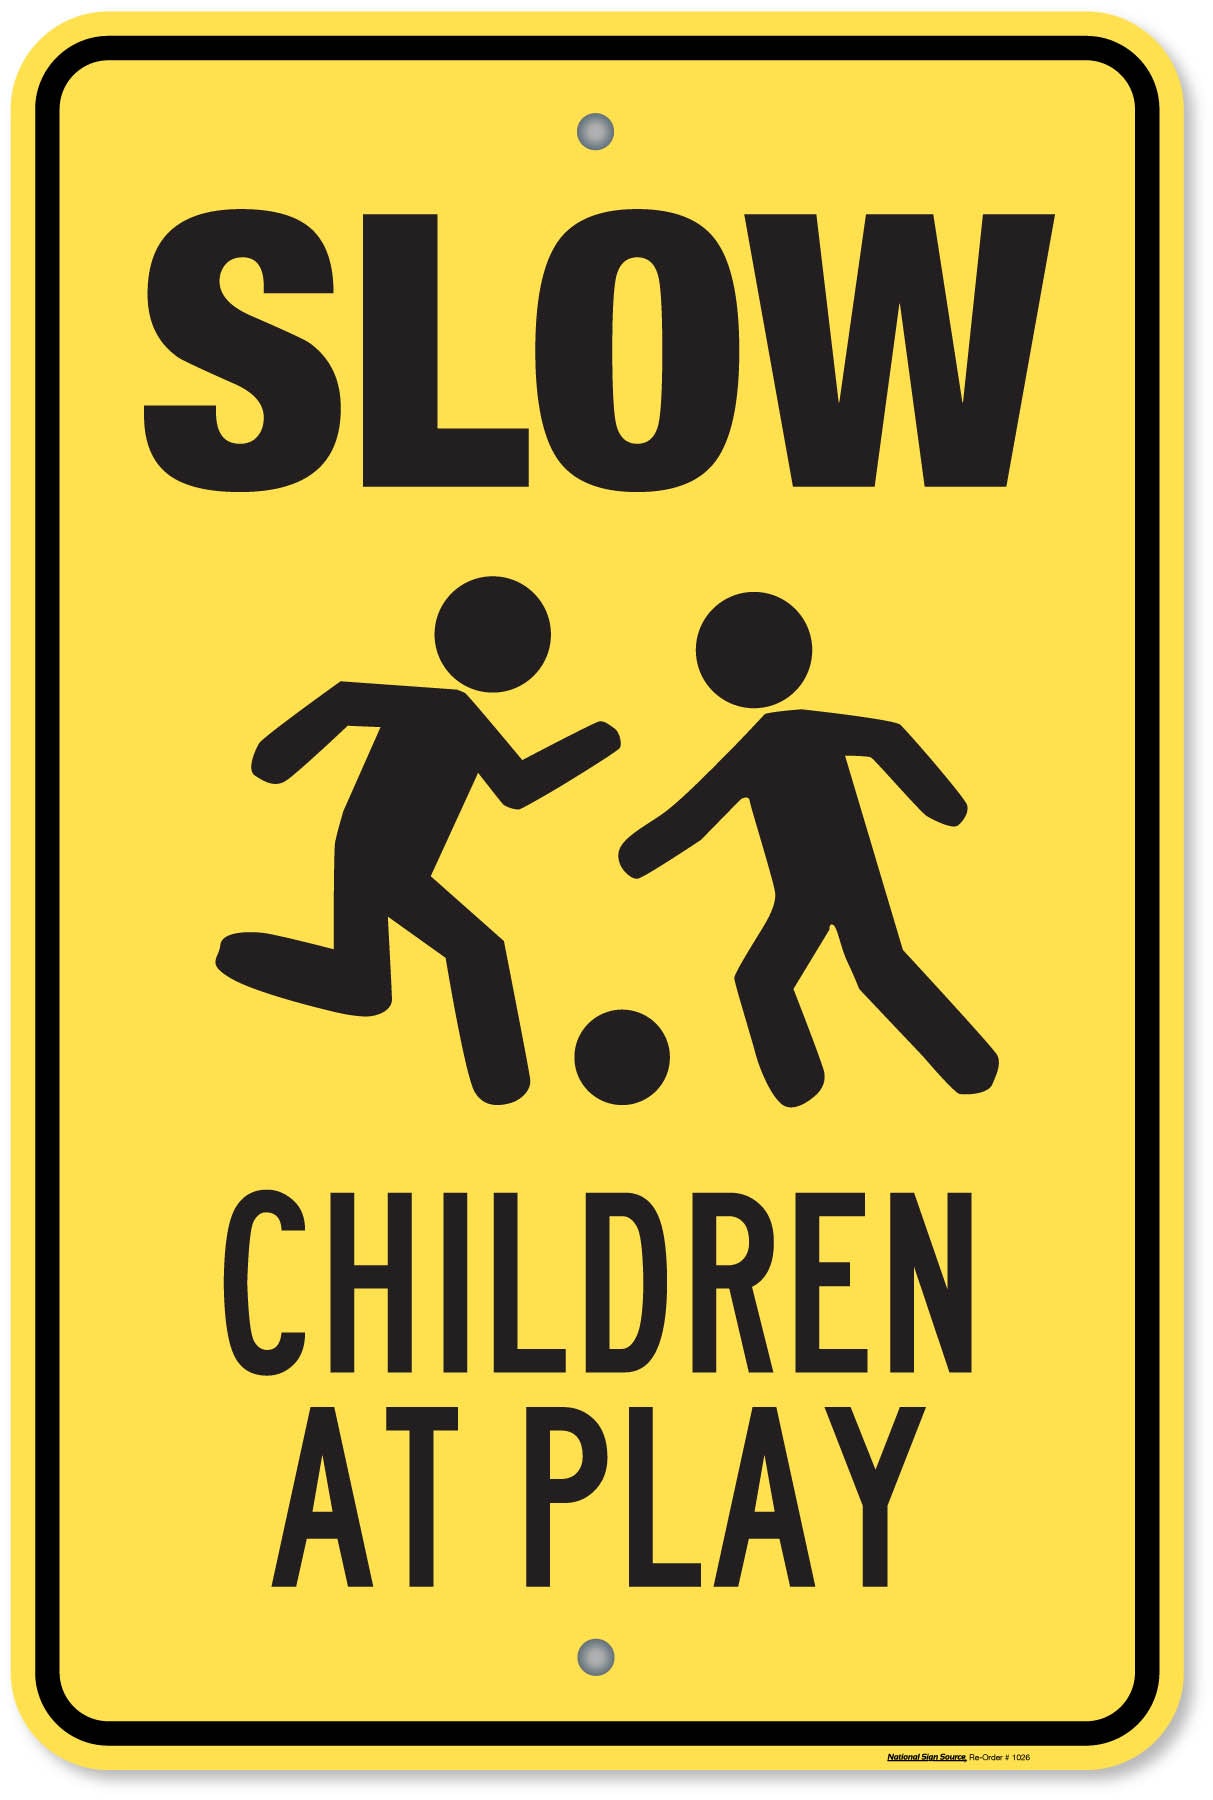 SLOW, children at play sign.  Aluminum, reflective heavy duty sign.